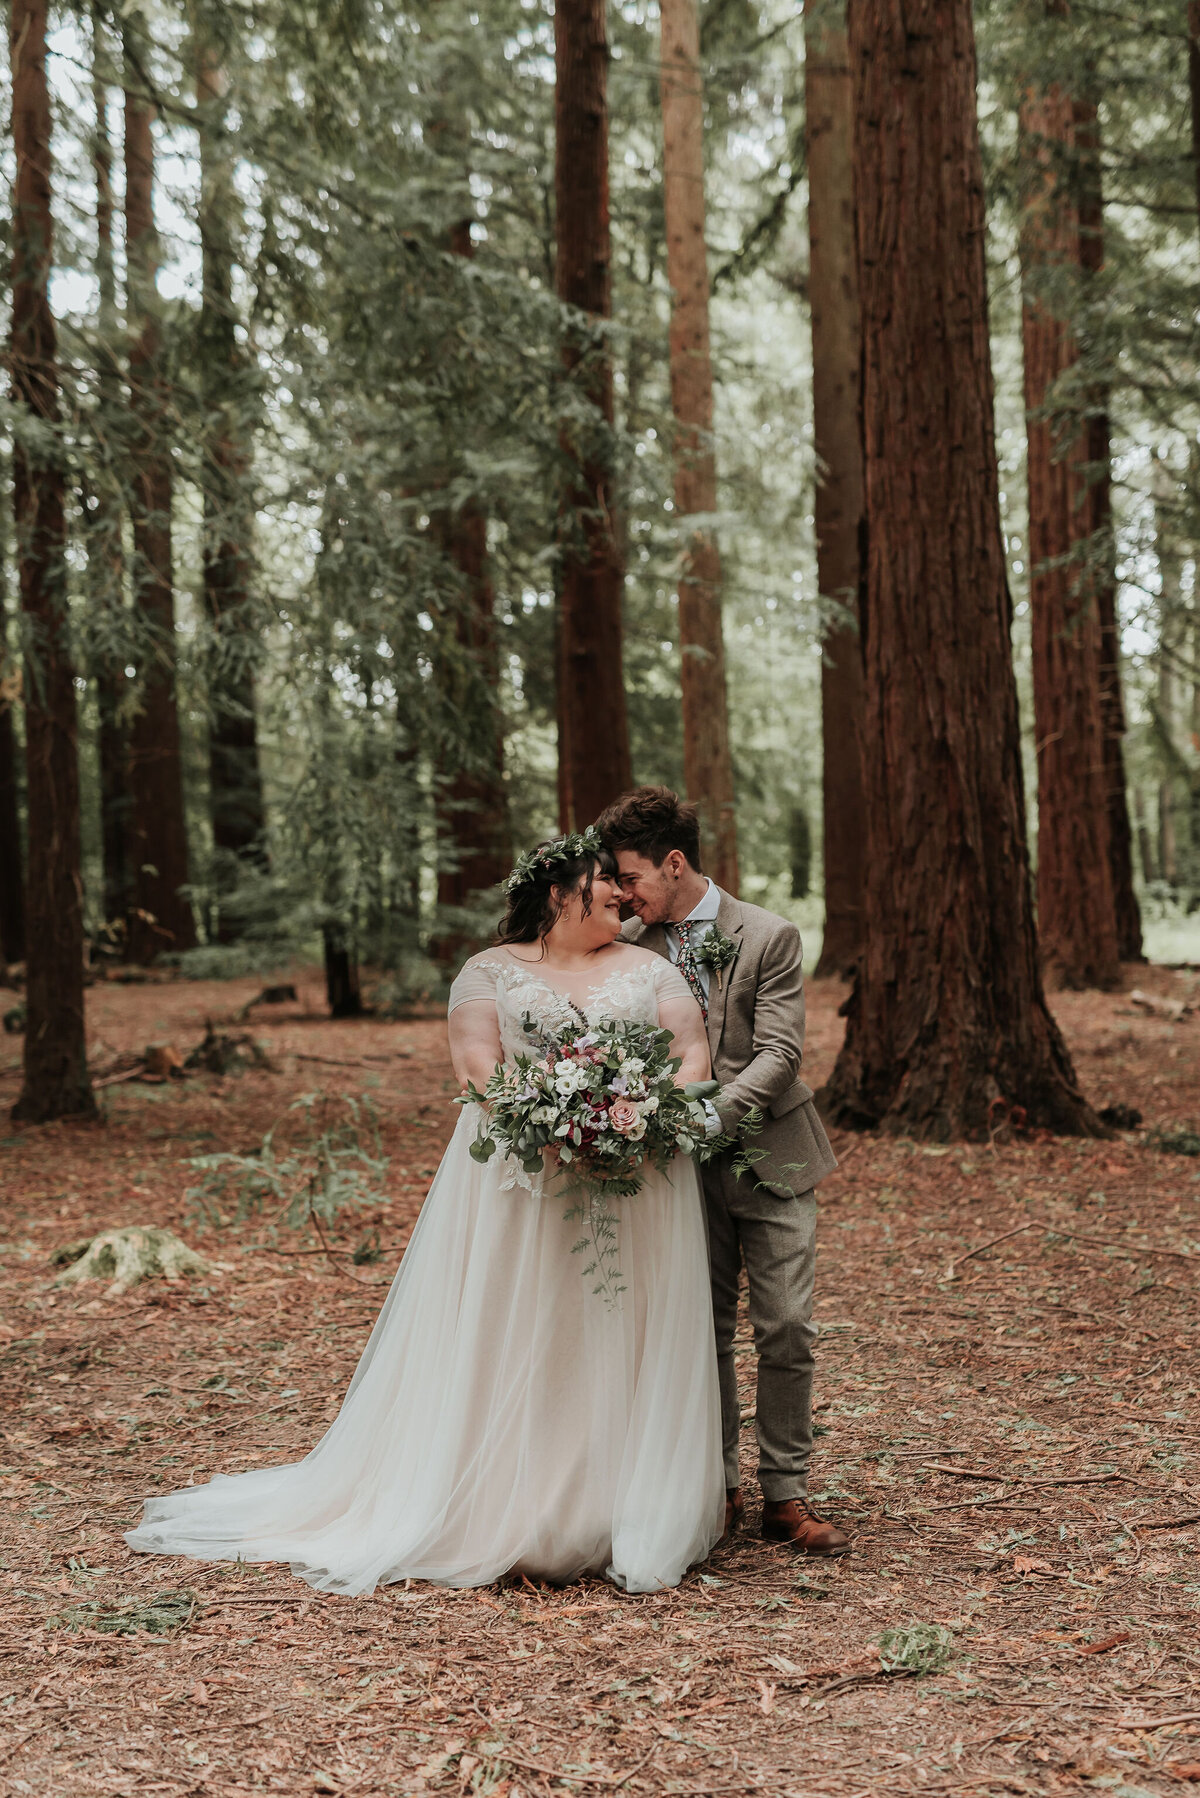 Bride & Groom embrace gently in the woodlands at their romantic woodland wedding at Two Woods Estate